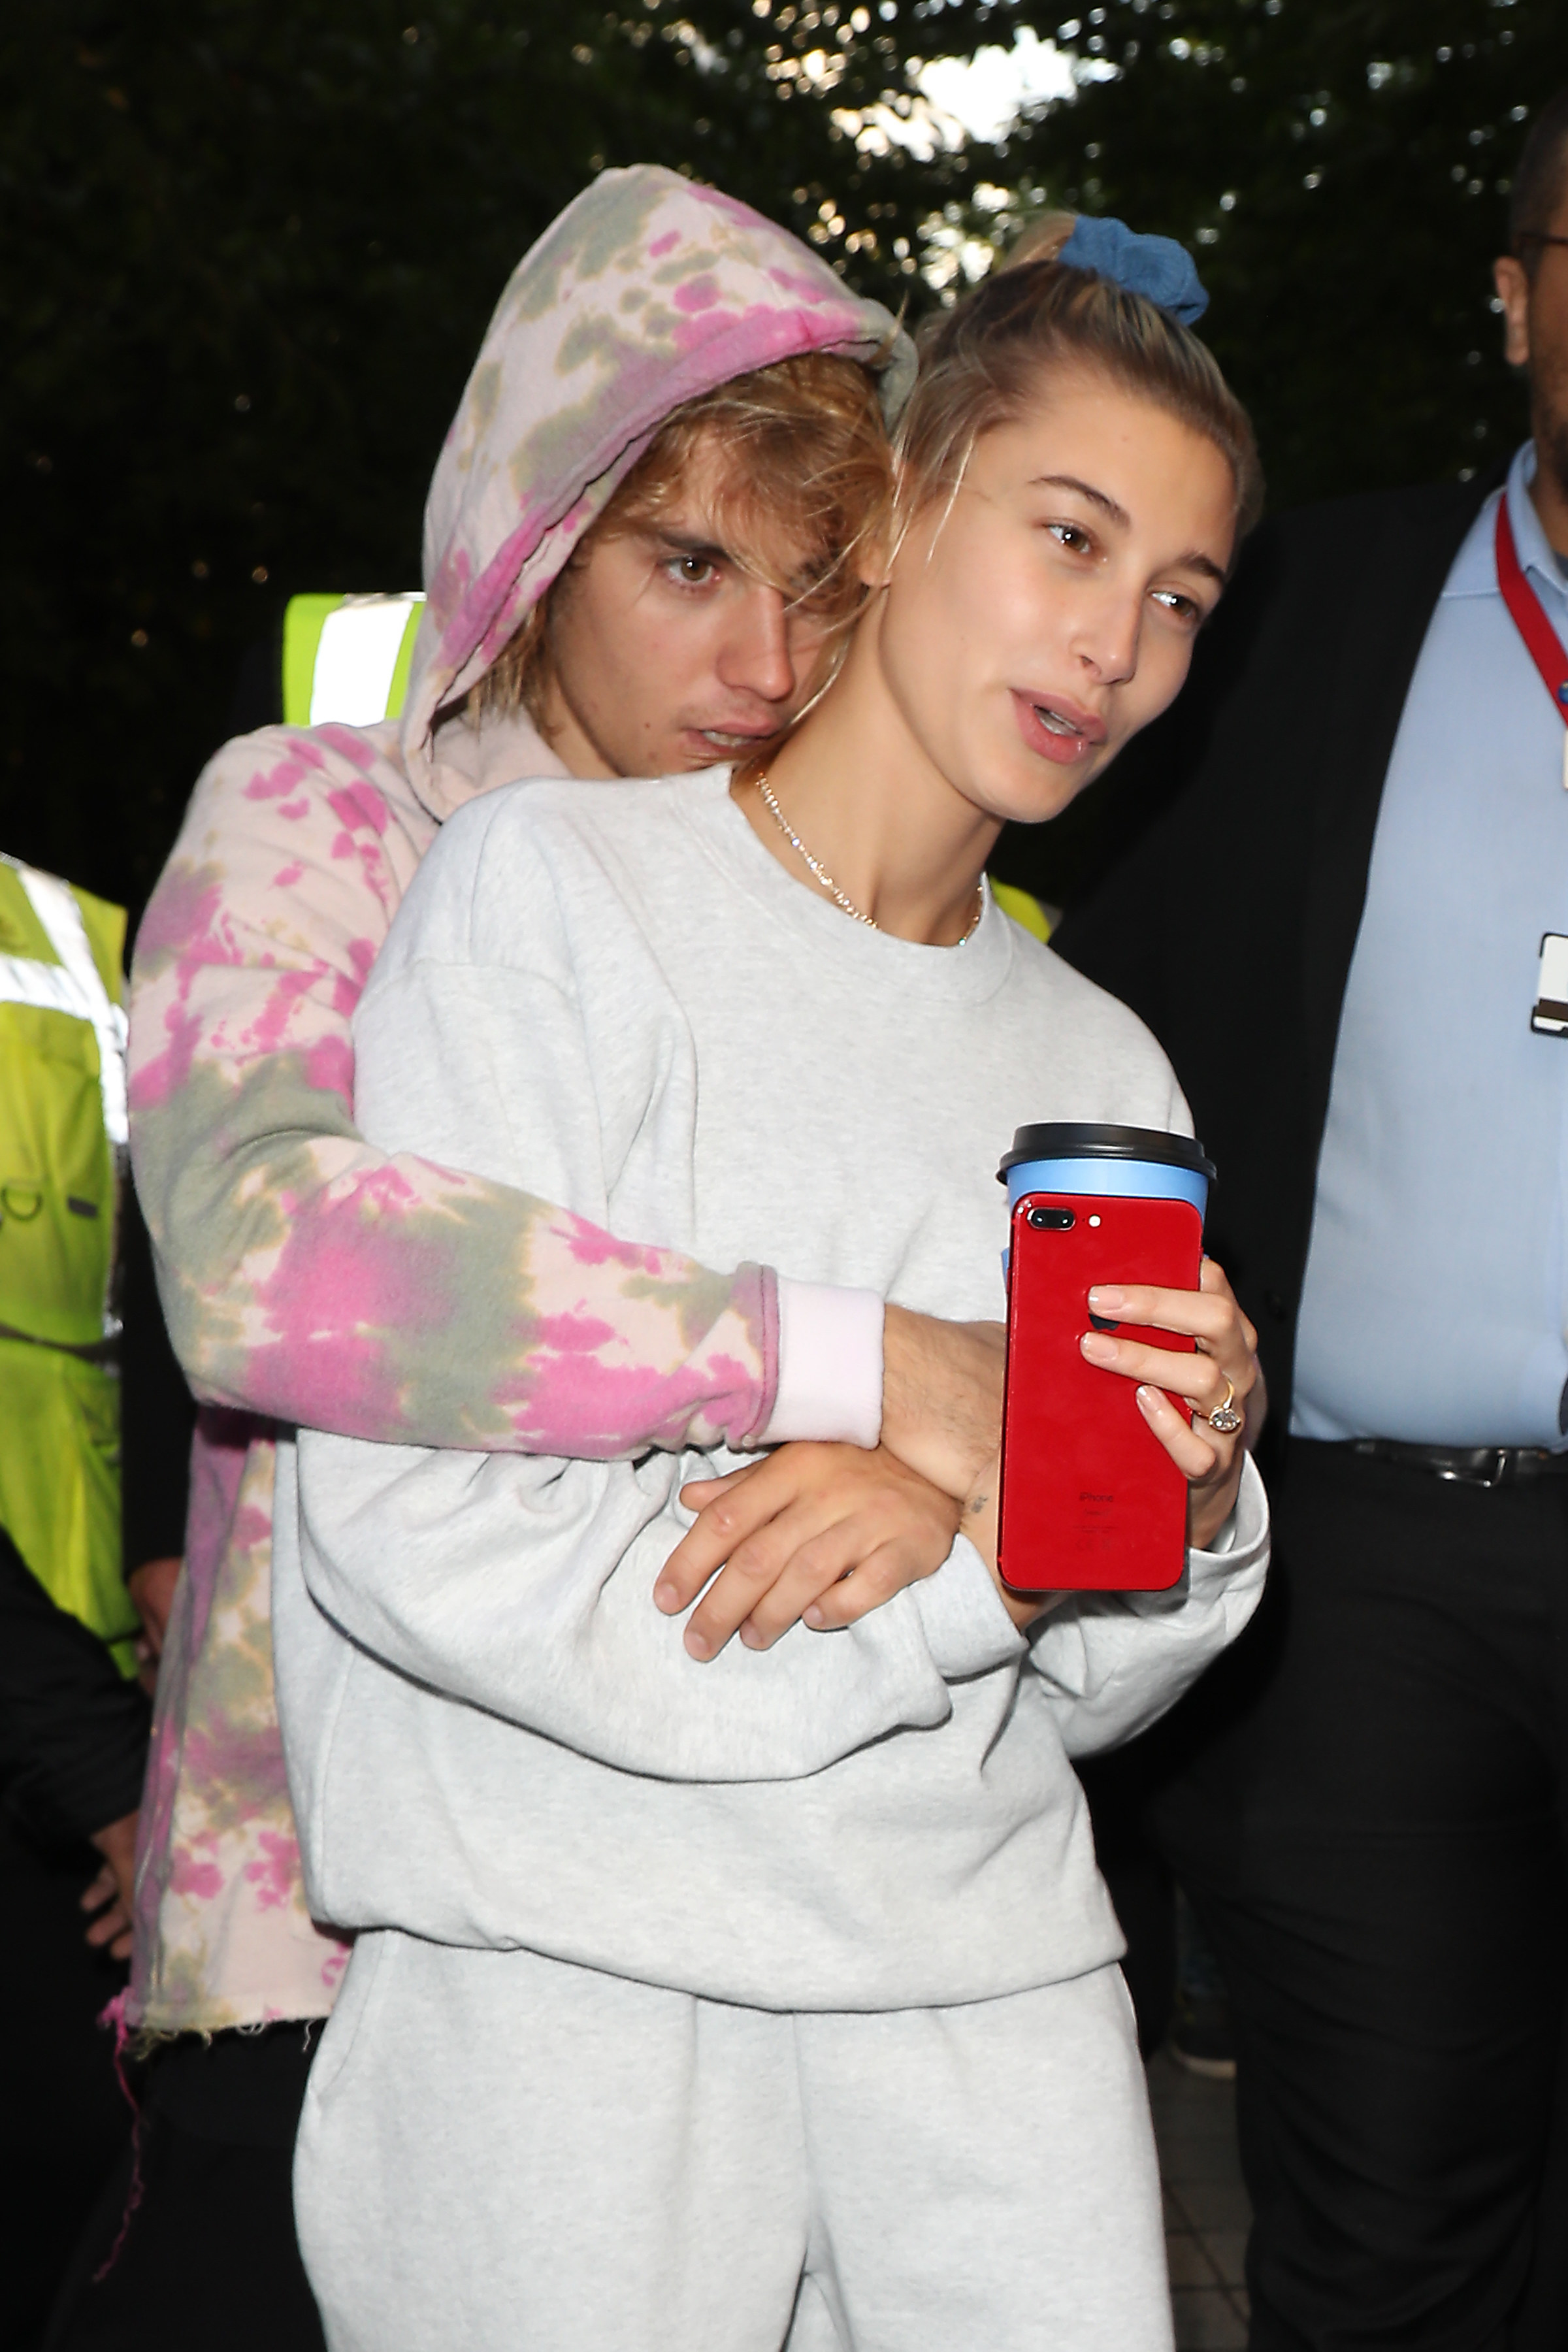 Justin Bieber and Hailey Baldwin visiting the London Eye on September 18, 2018 in London, England